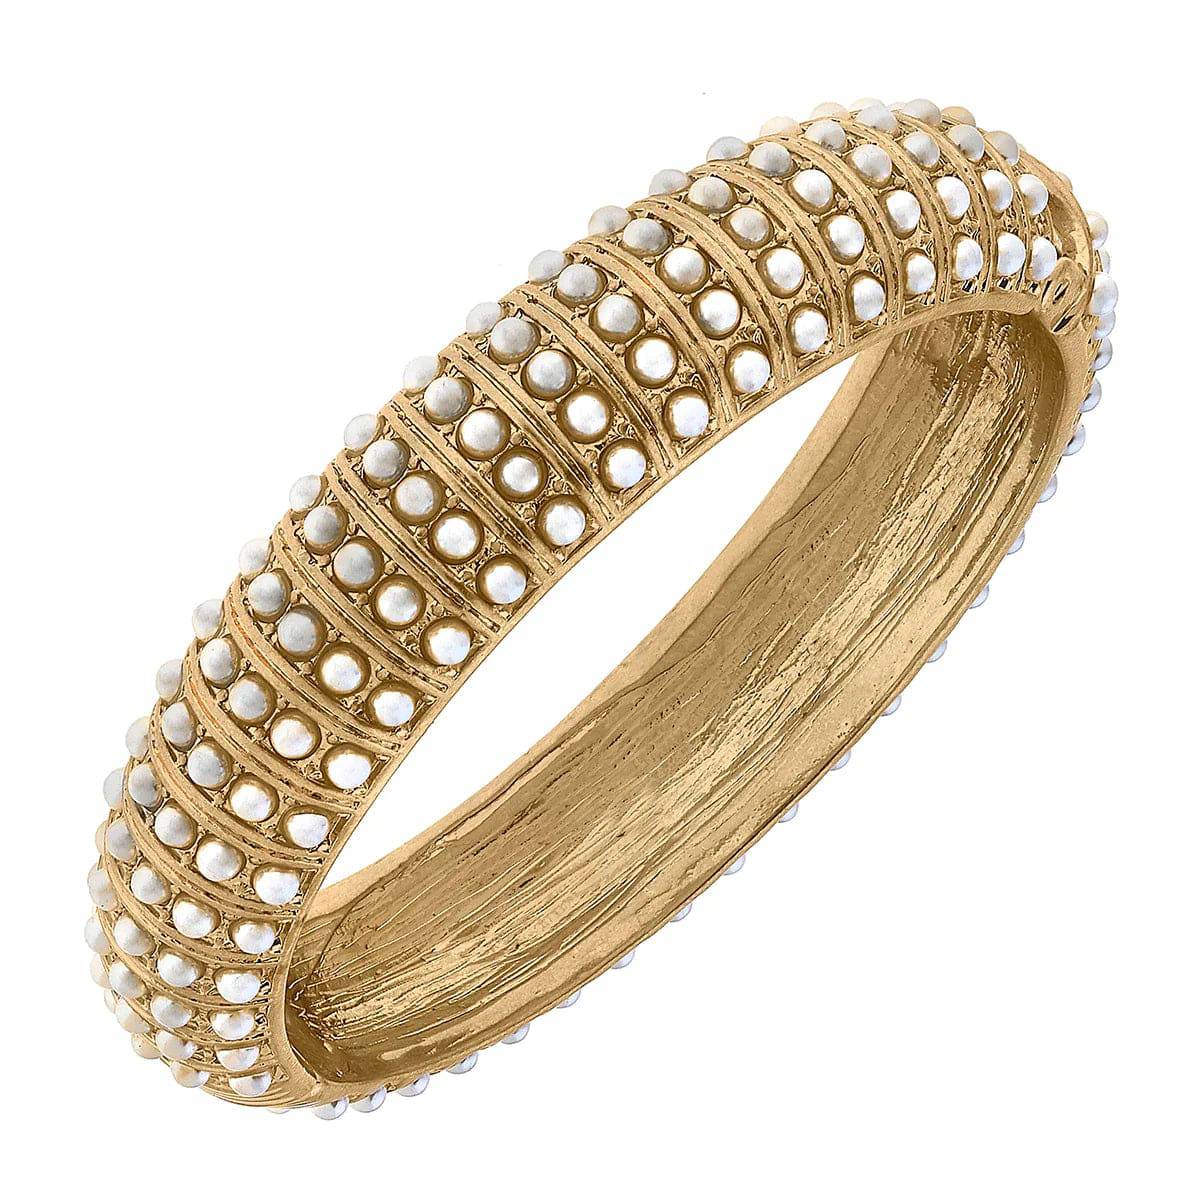 Jagger Pearl-Studded Statement Bangle in Ivory - Findlay Rowe Designs